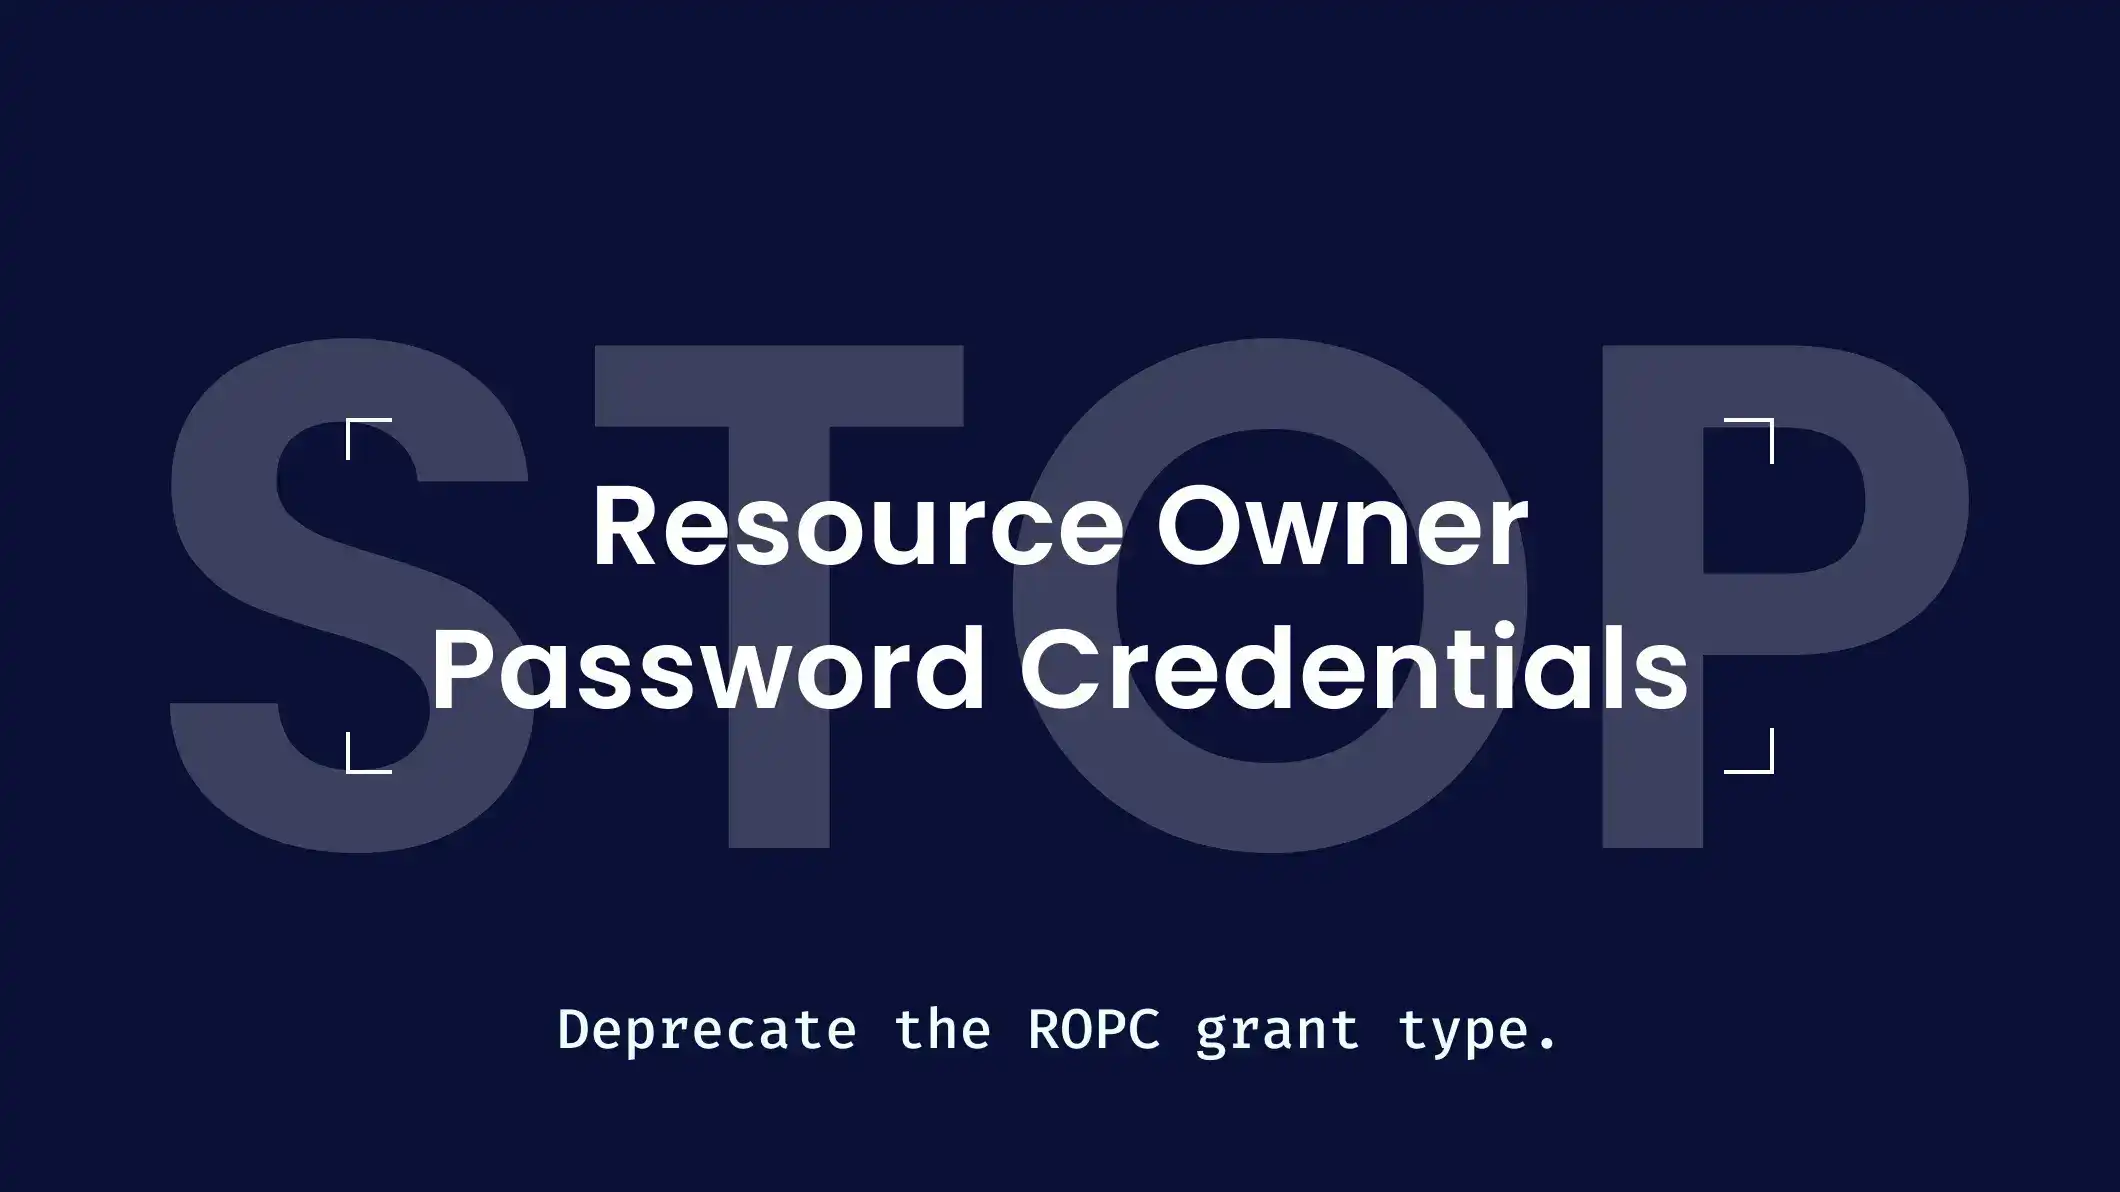 Why you should deprecate the Resource Owner Password Credentials (ROPC) grant type